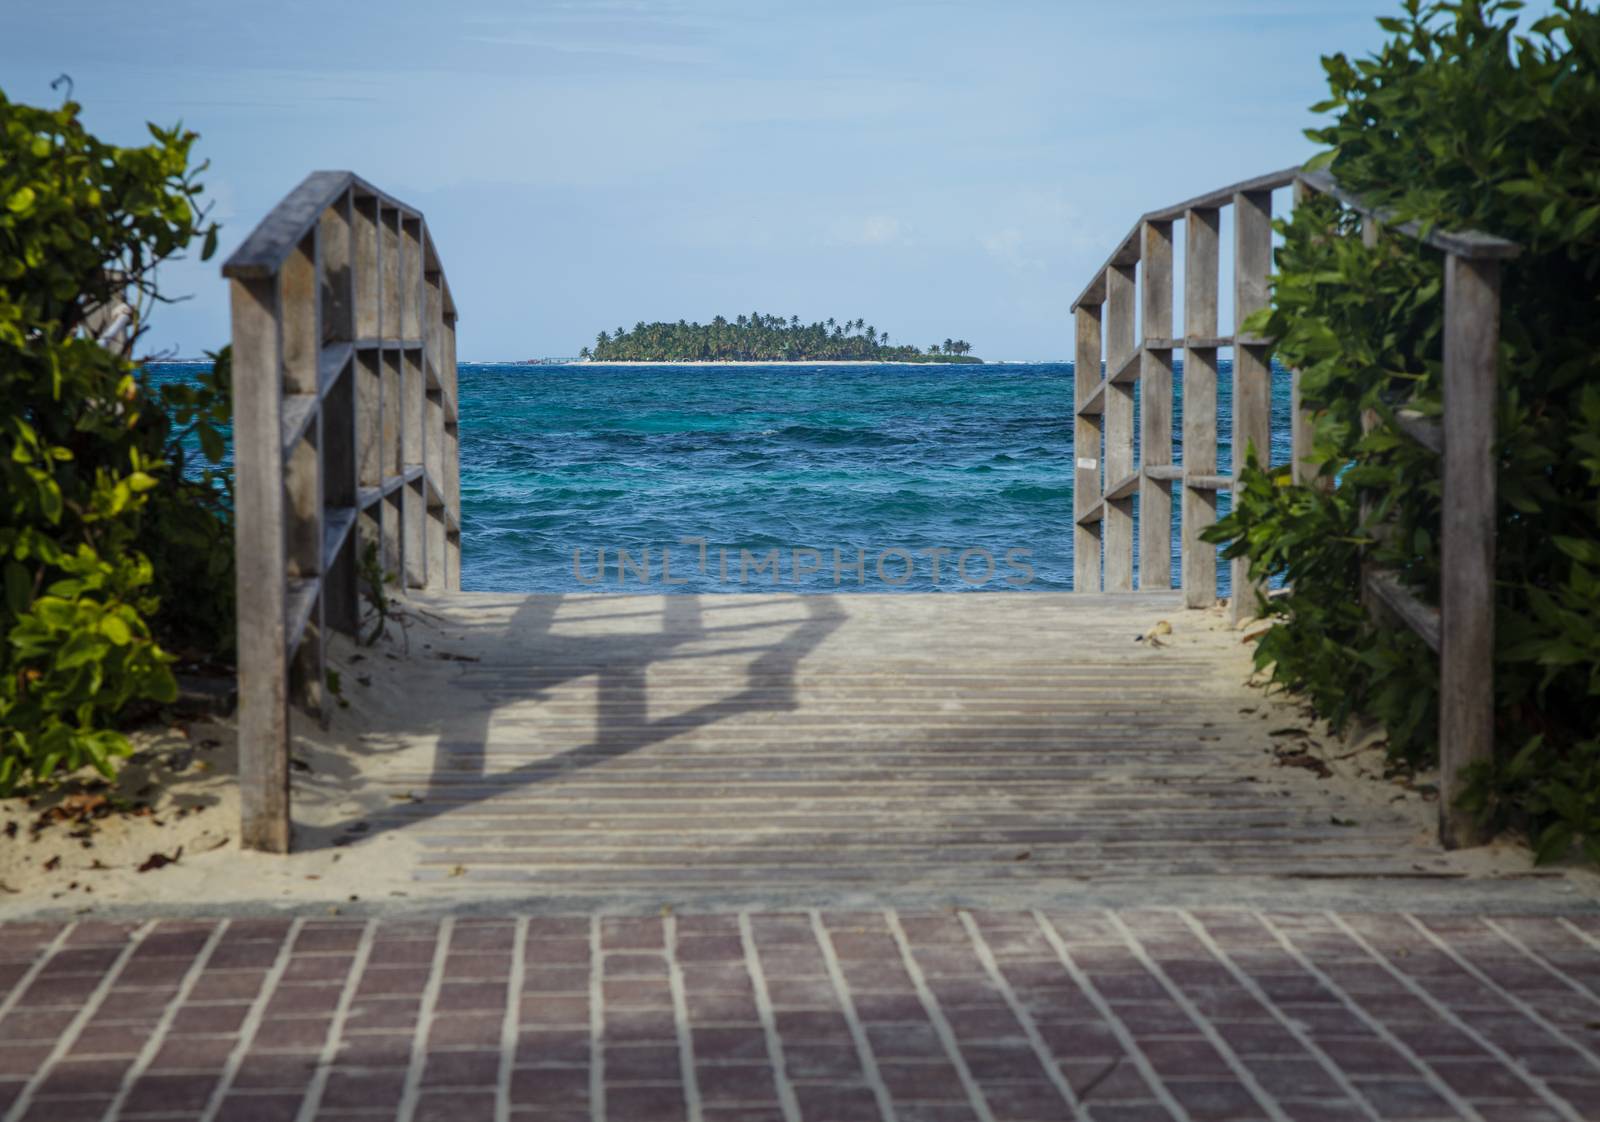 Bridge with a Desert Island in Background by aetb